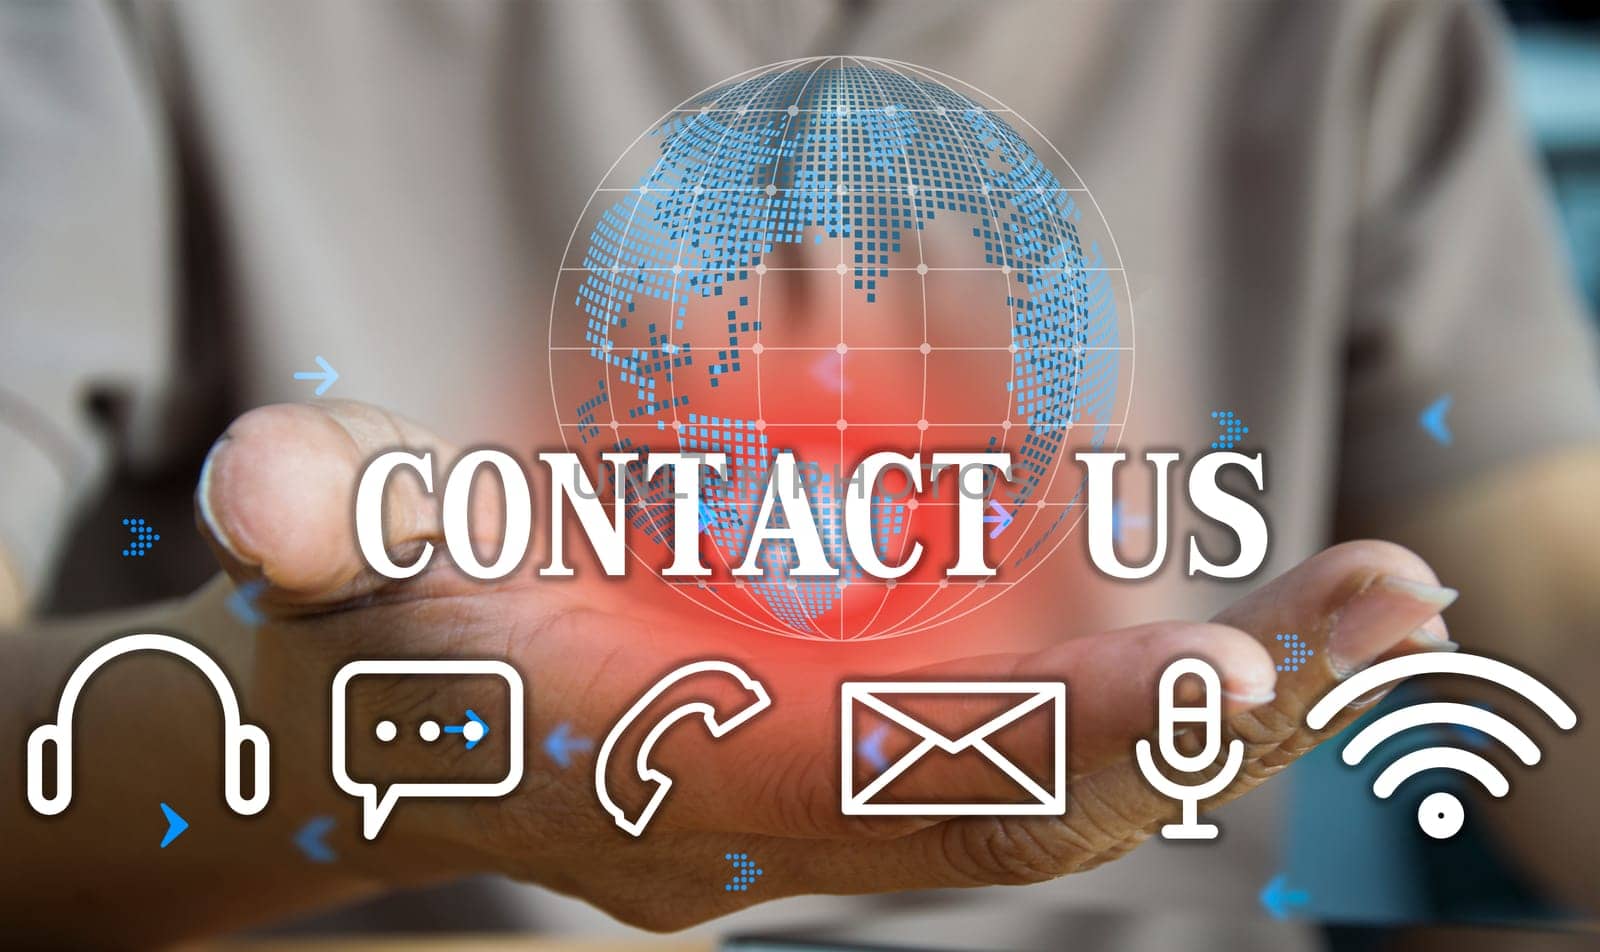 Contact us or our customer support hotline where people connect. and touch the contact icon on the virtual screen	 by boonruen